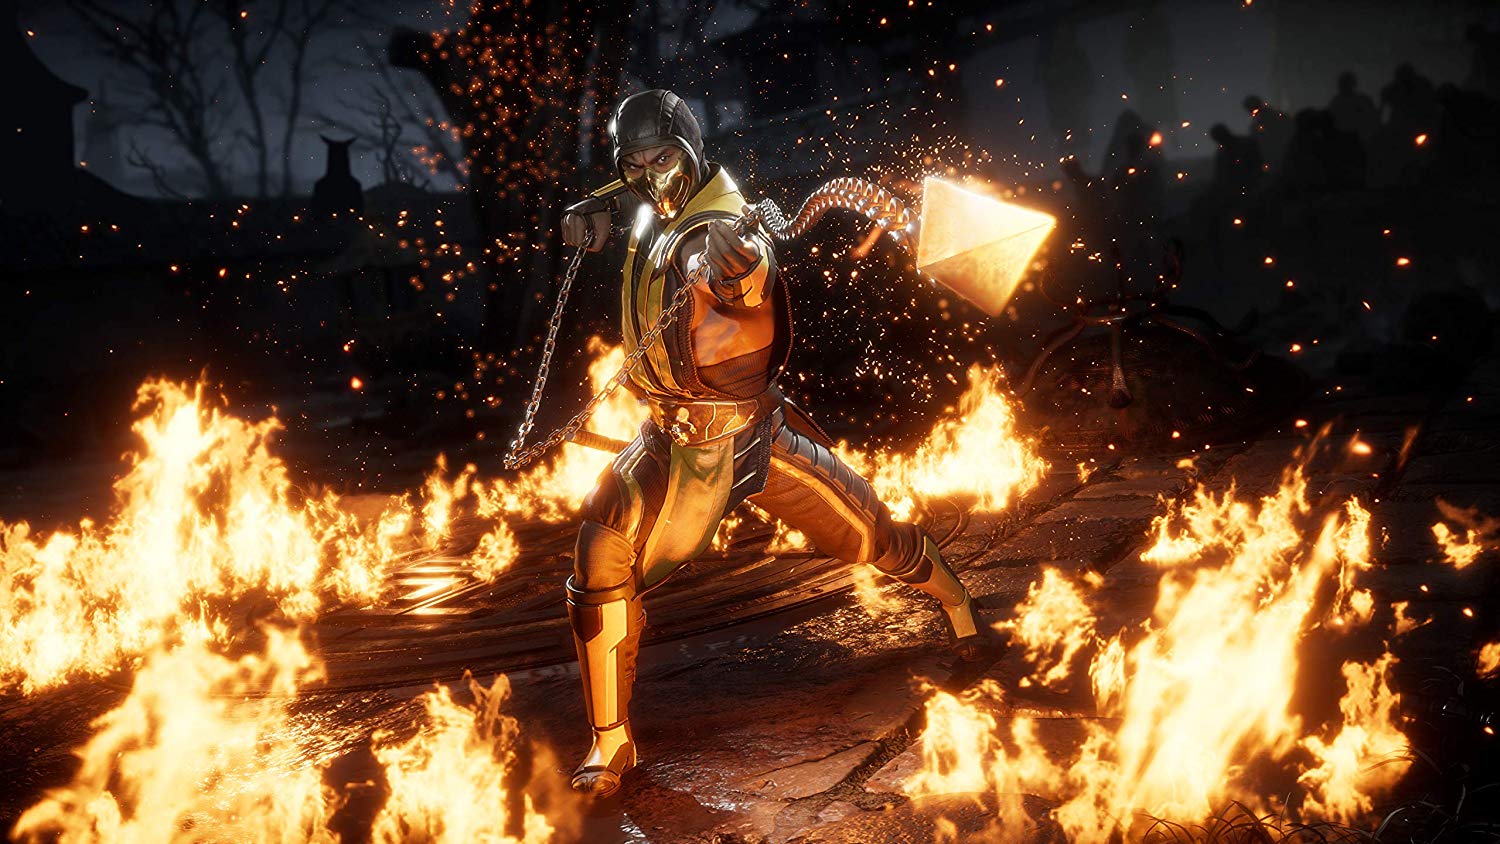 Best 50+ Images Of Scorpion From Mortal Kombat